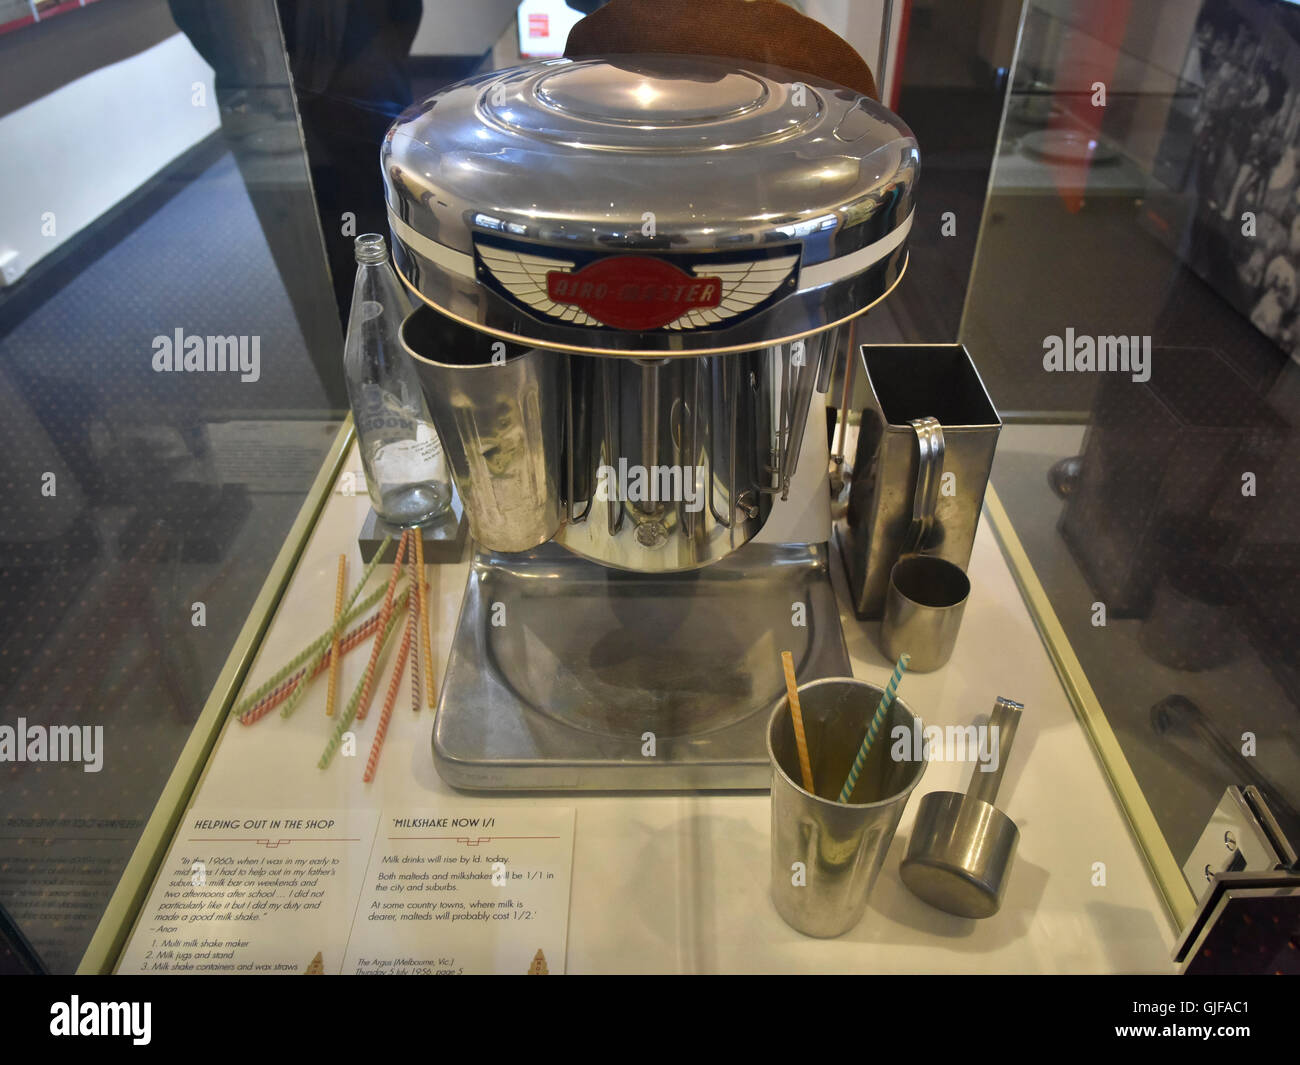 milk shake maker on display from the The Roxy Theatre, situated in the main street of Bingara. Stock Photo